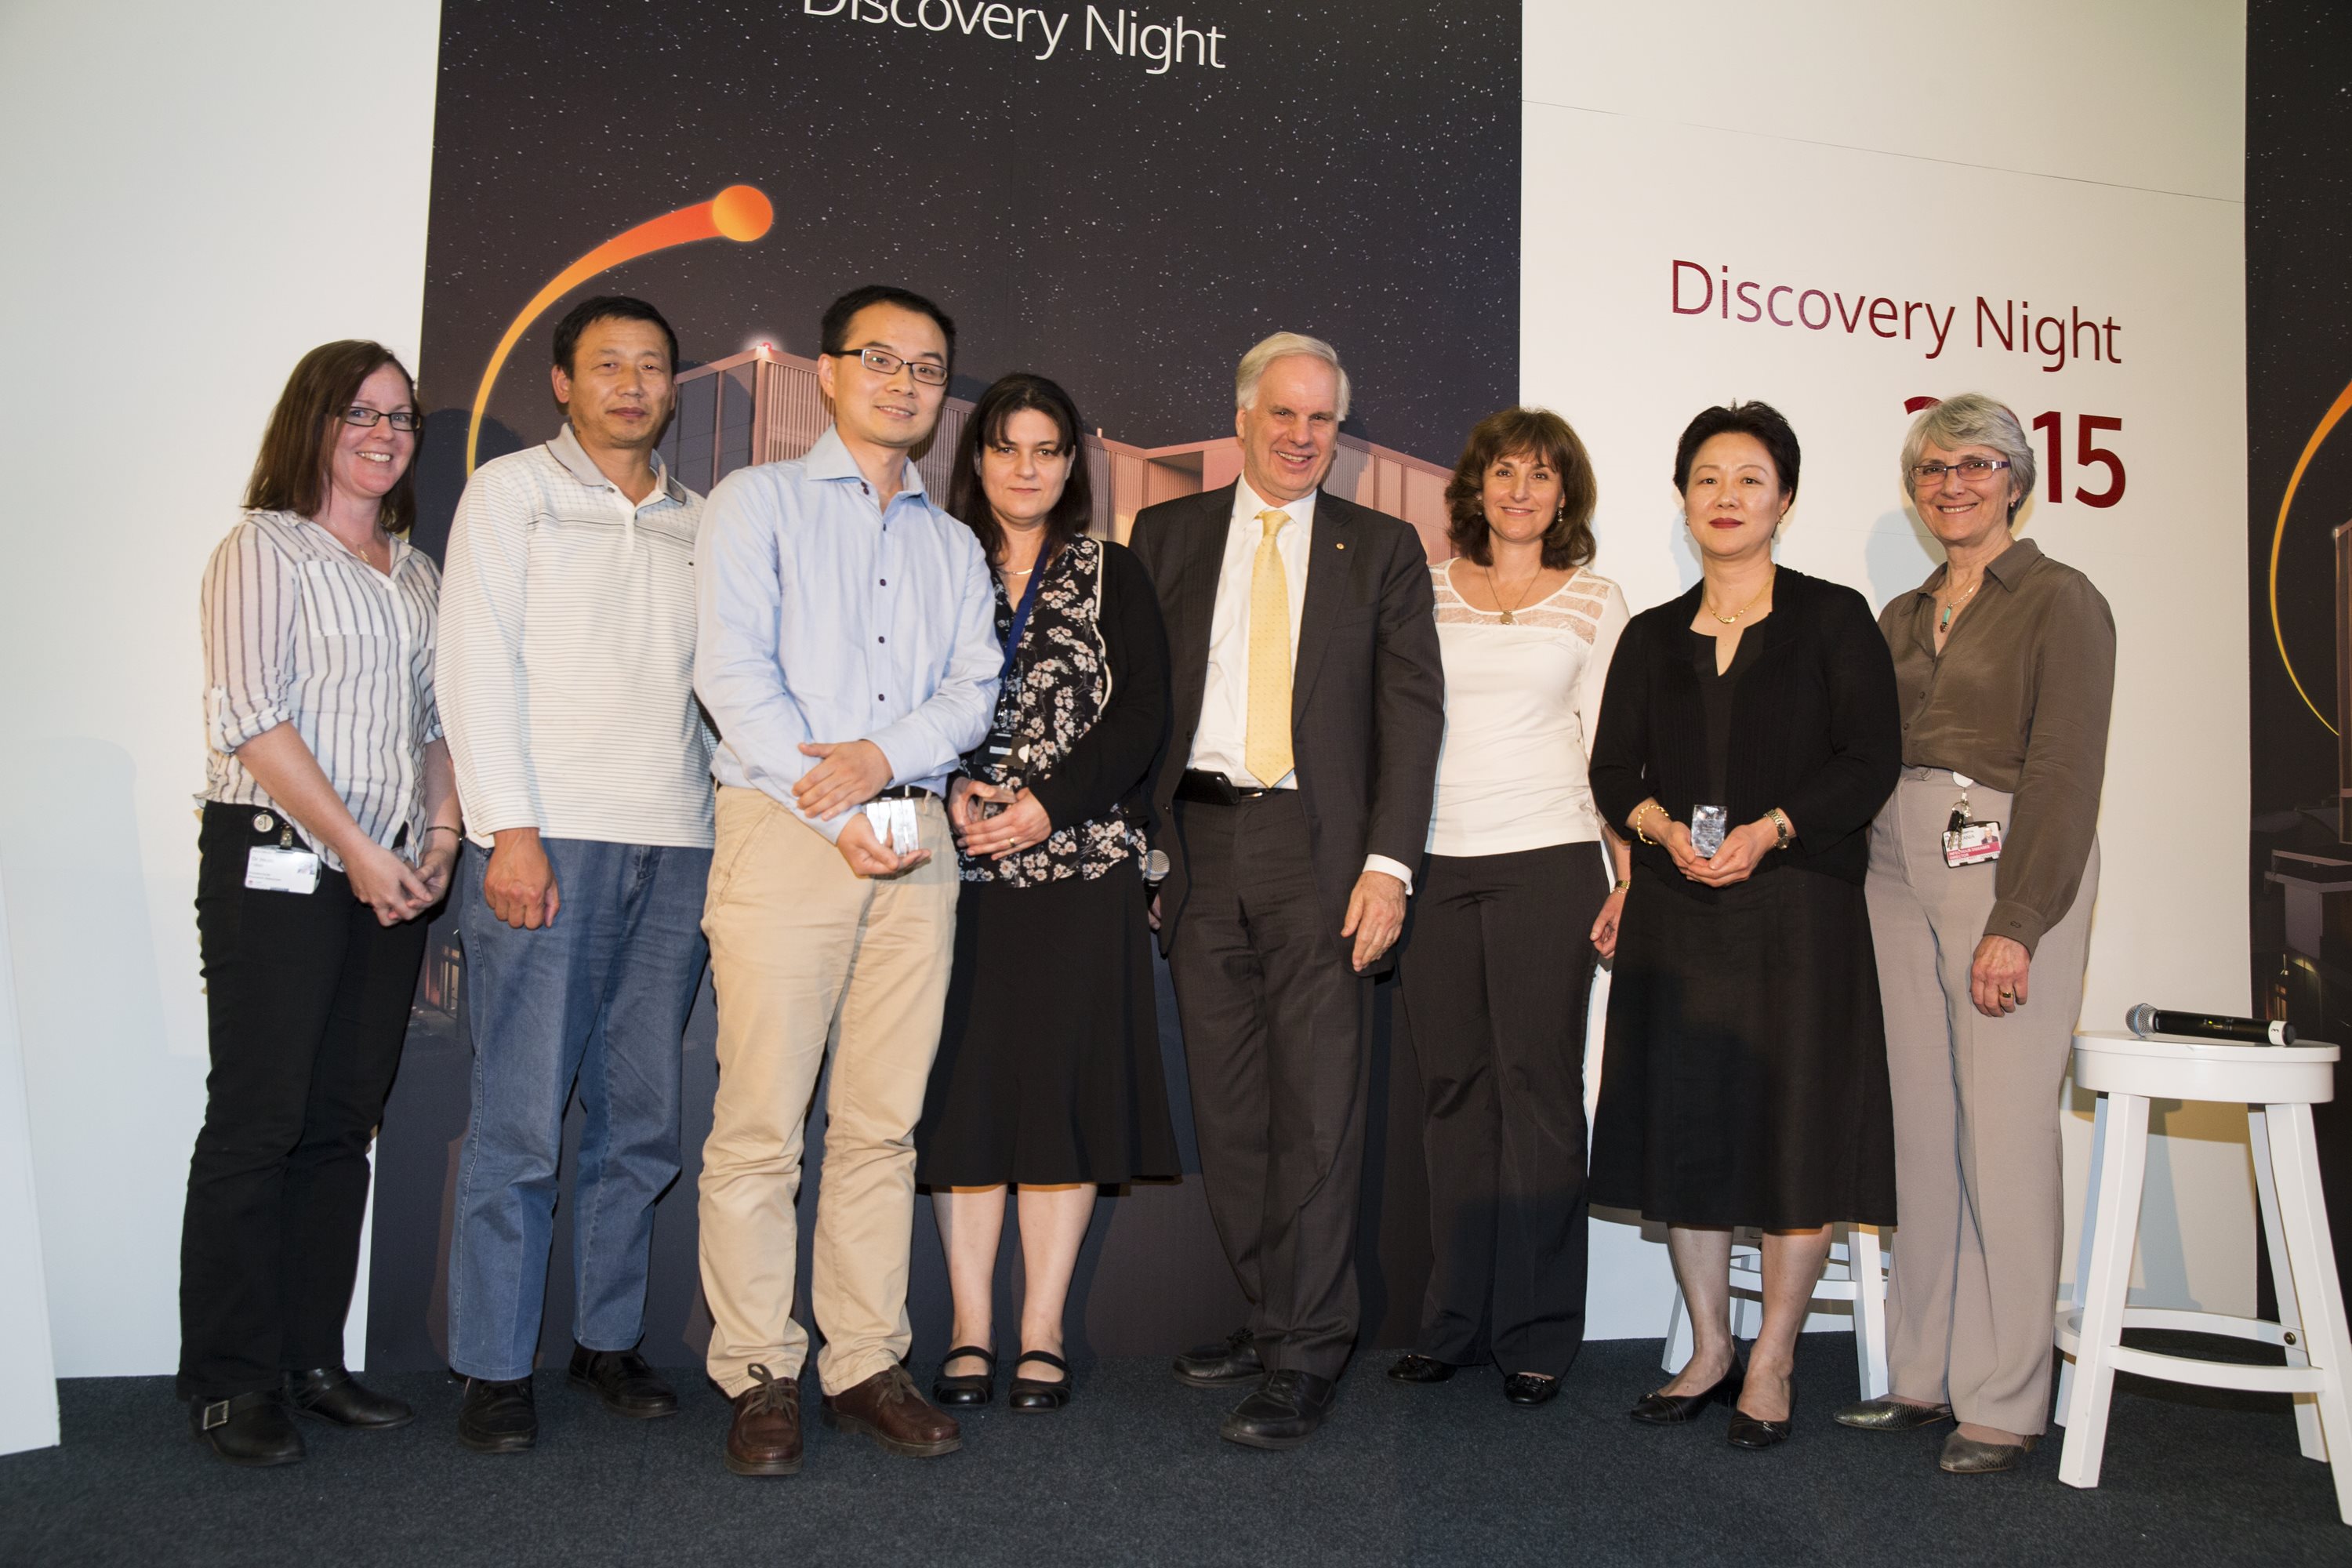 Institute ED Professor Tony Cunningham (Centre) with Science Prize winners (from left to right) Dr Heidi Hilton, Dr Yiping Wang, Dr Qi Cao, Dr Sophie Lev, Associate Professor Julianne Djordjevic, Dr Min Kim, and Professor Tania Sorrell (accepting for Professor Wieland Meyer)